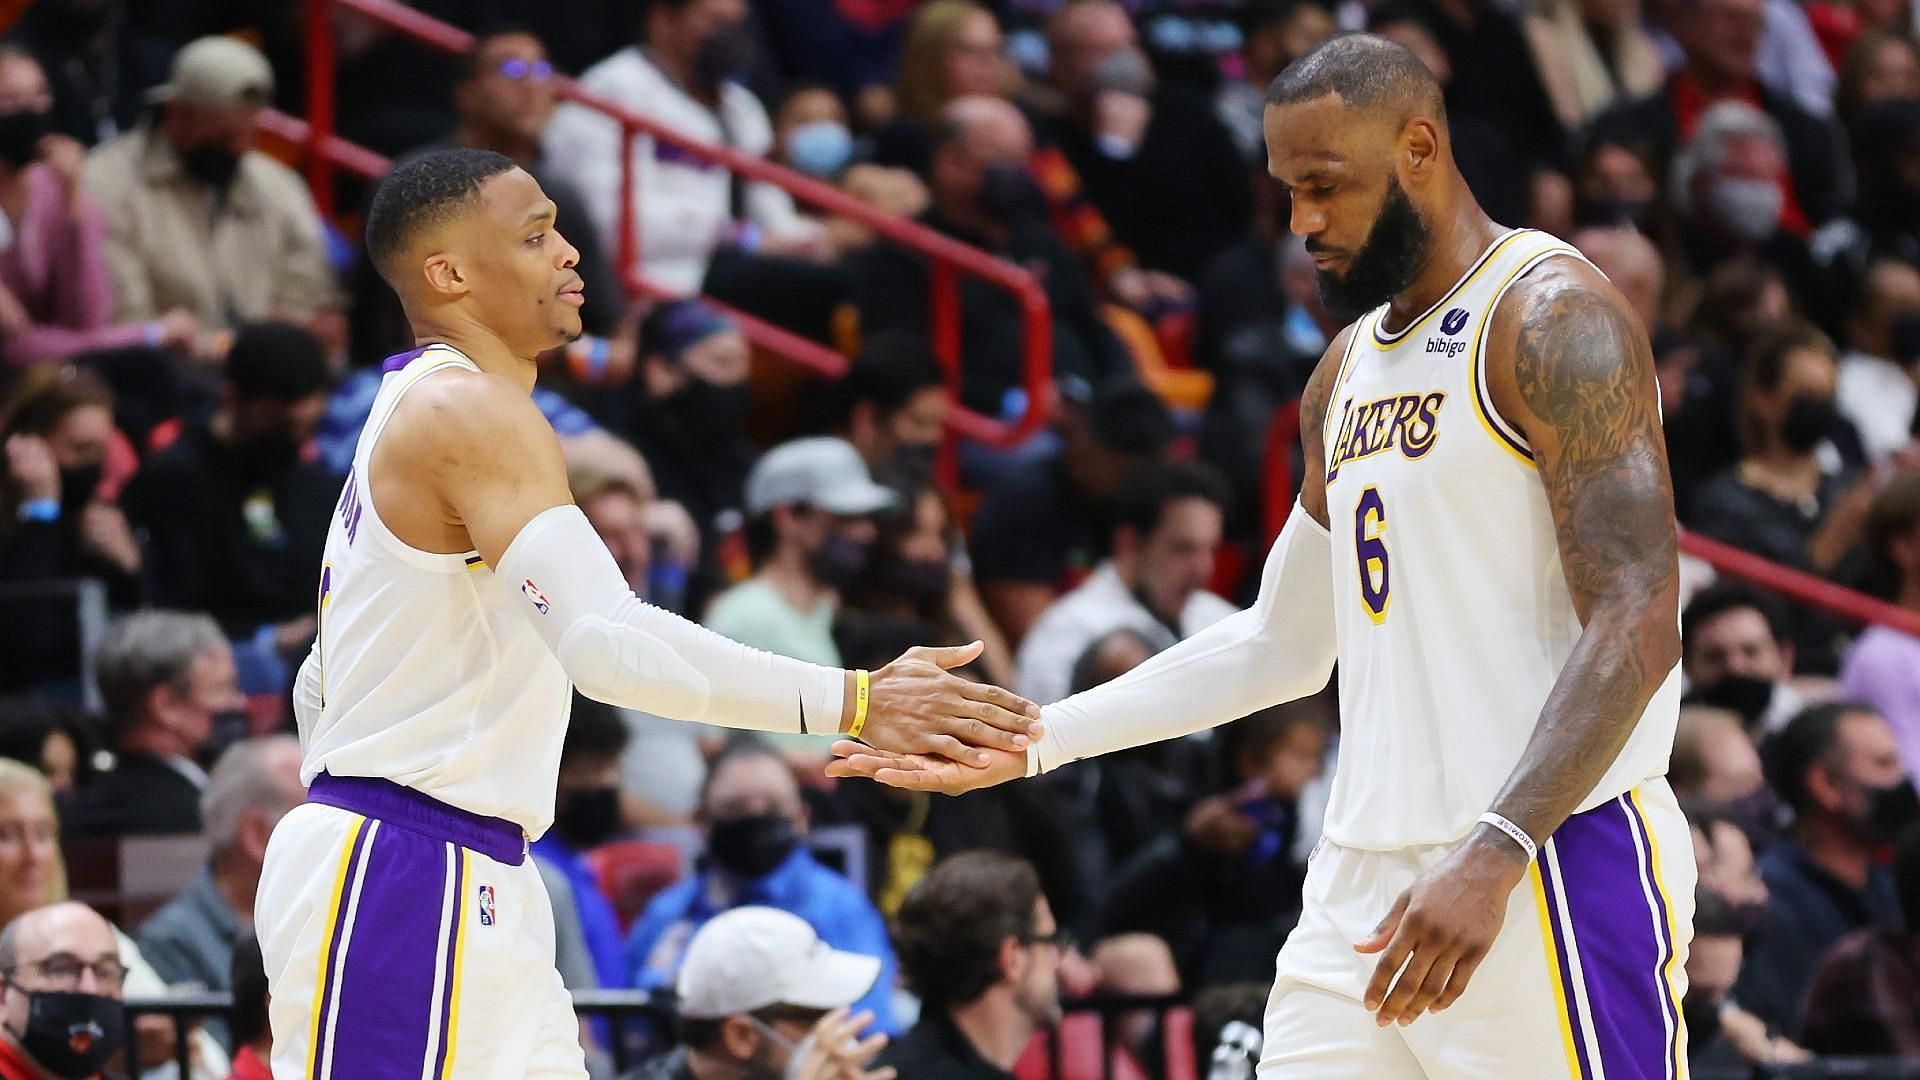 Russell Westbrook, left, and LeBron James didn&#039;t meet during the LA &lt;a href=&#039;https://www.sportskeeda.com/basketball/los-angeles-lakers&#039; target=&#039;_blank&#039; rel=&#039;noopener noreferrer&#039;&gt;Lakers&lt;/a&gt;&#039; Summer League game against the Phoenix Suns. [Photo: Sporting News]